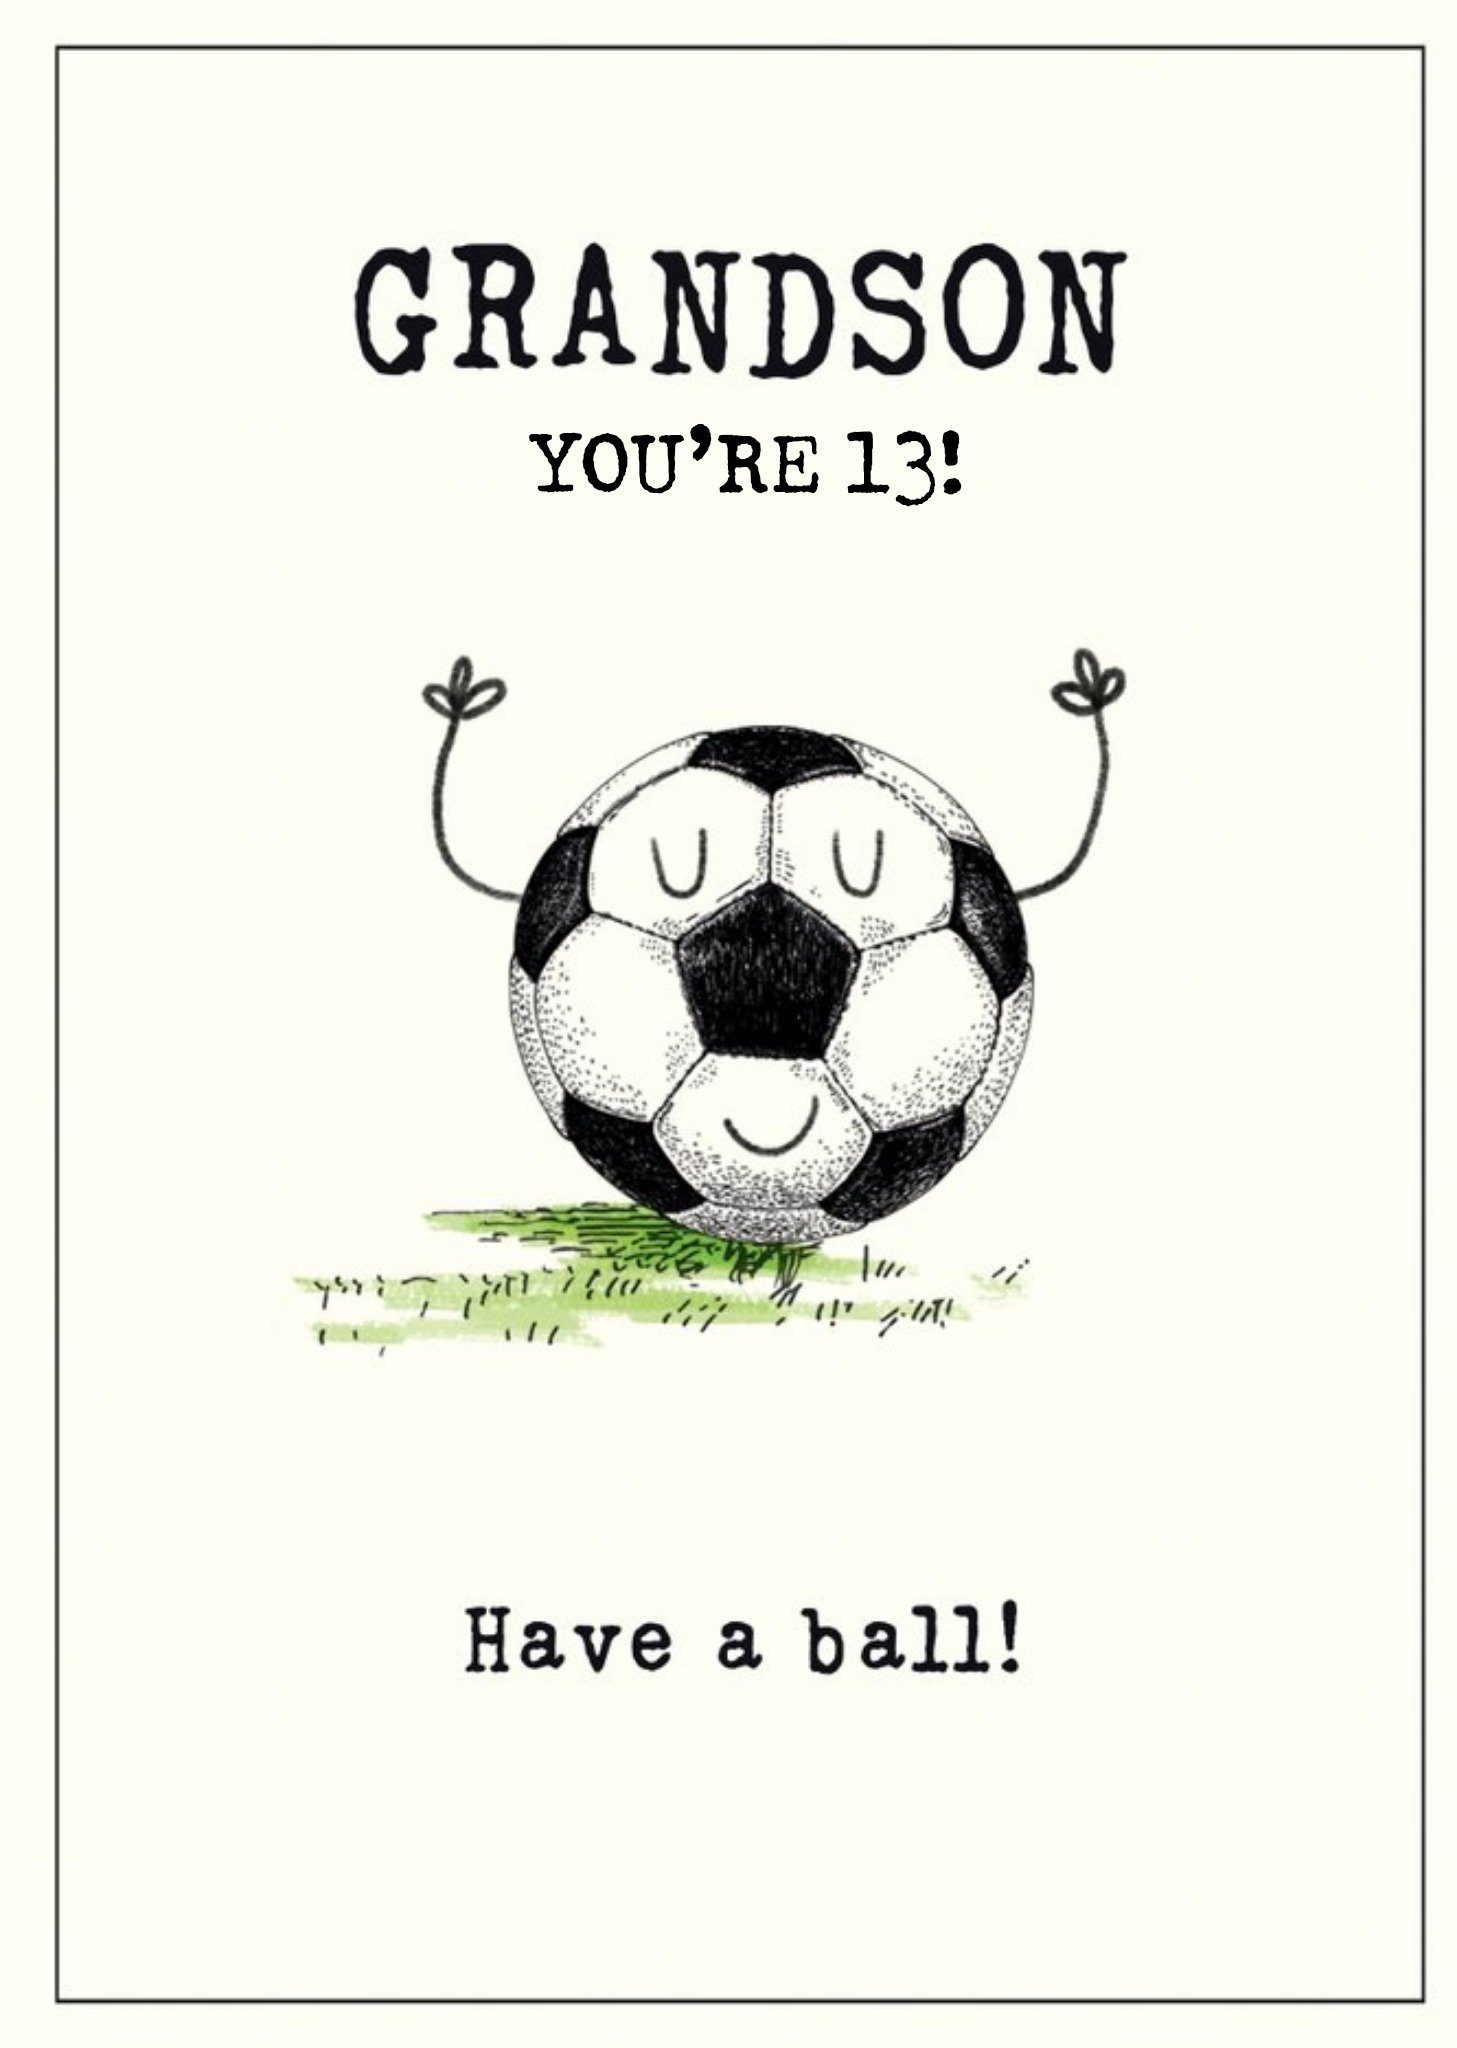 Moonpig Illustration Of A Football With A Smiley Face Grandson's Birthday Card, Large